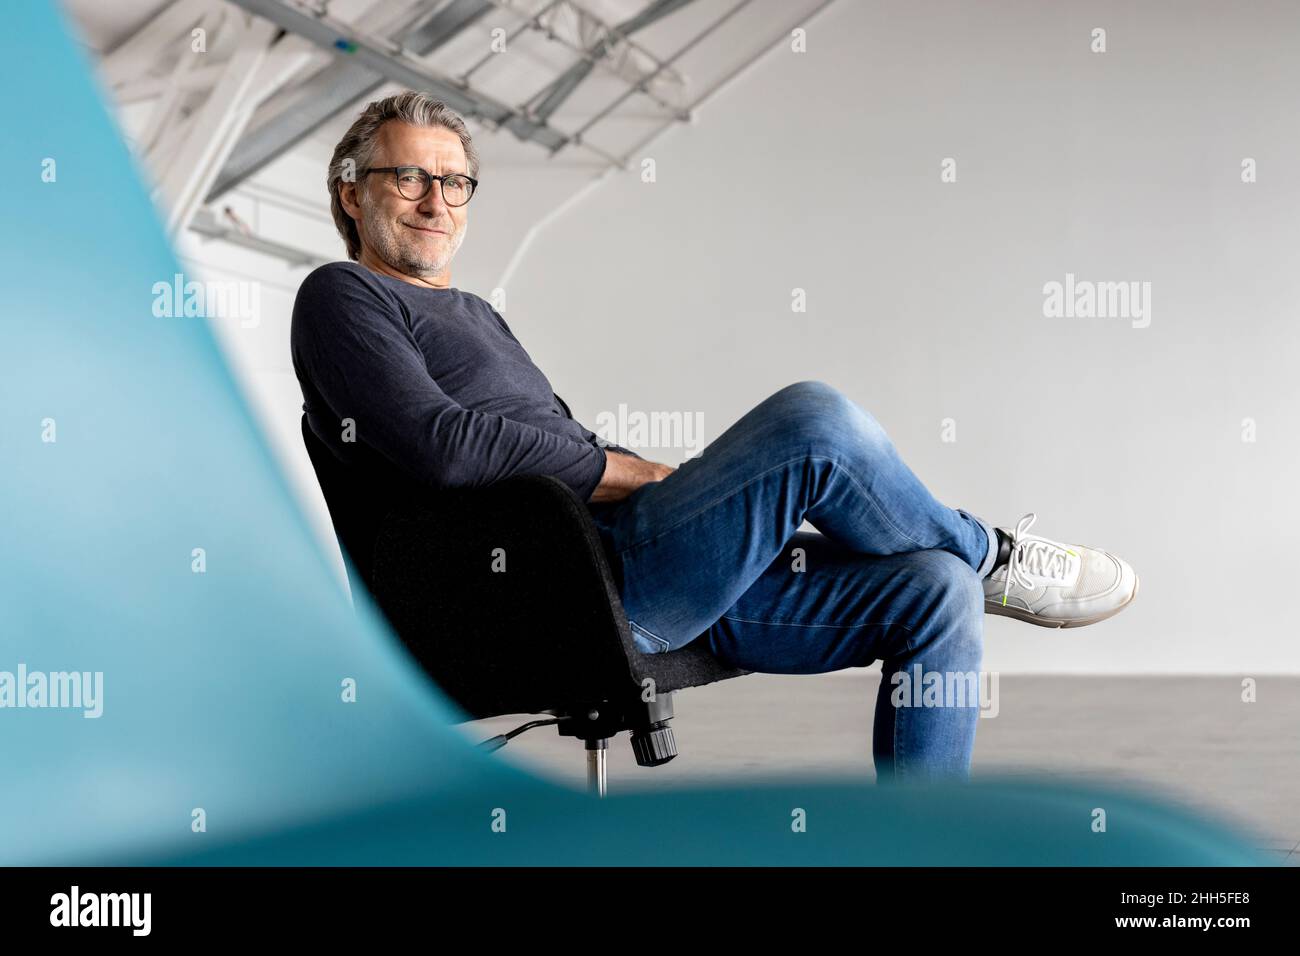 Smiling businessman sitting with legs crossed at knee on chair Stock Photo